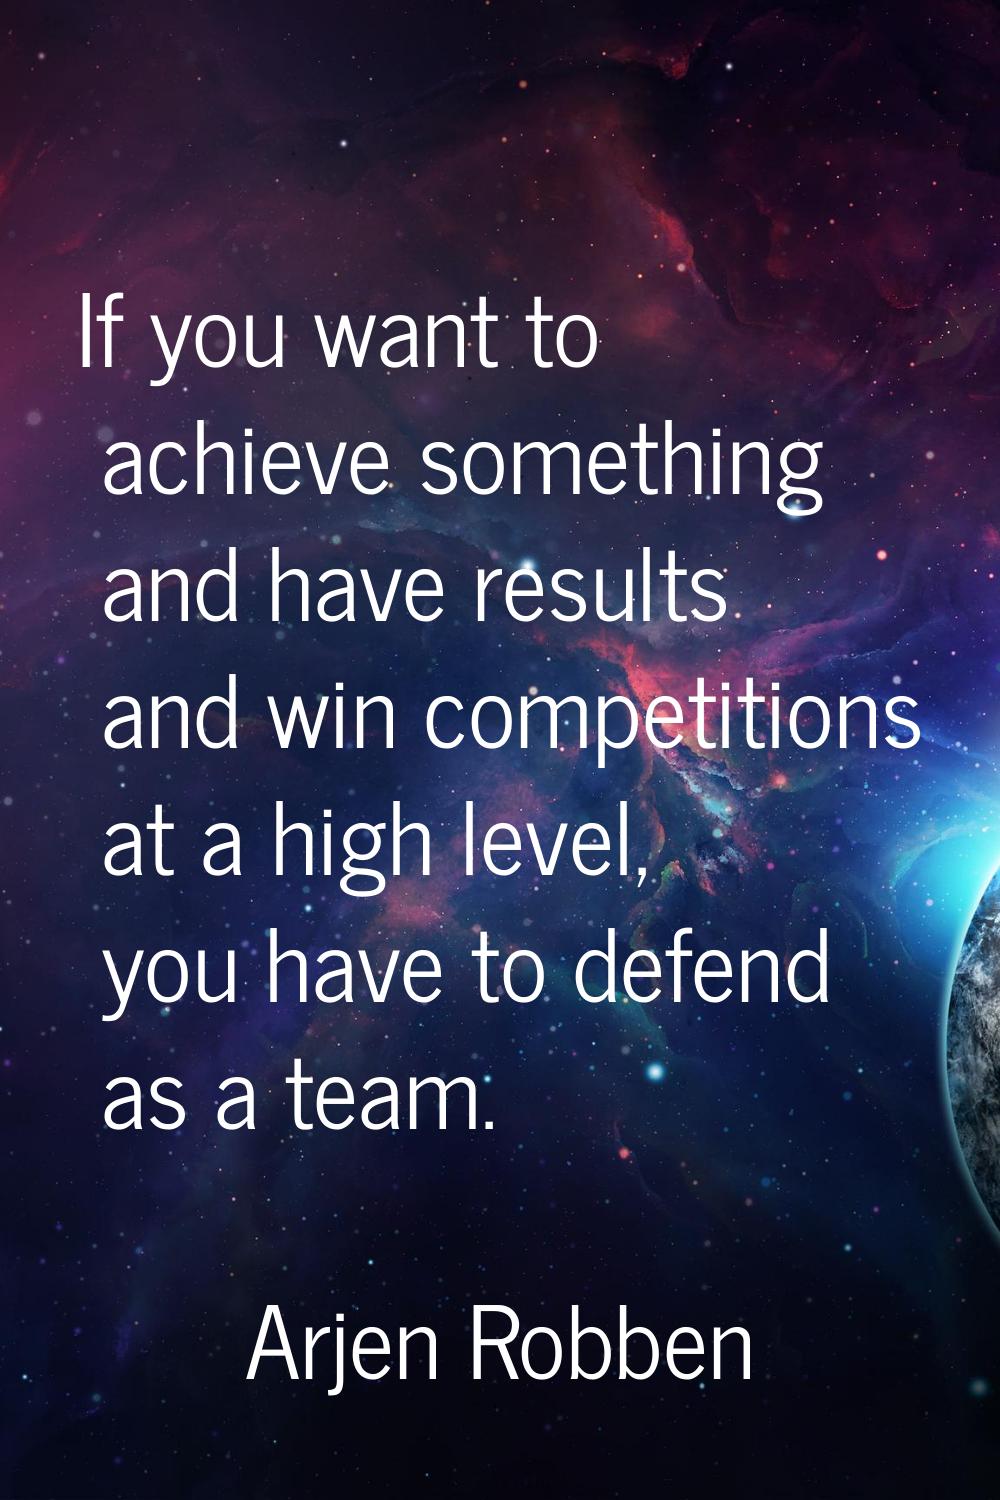 If you want to achieve something and have results and win competitions at a high level, you have to